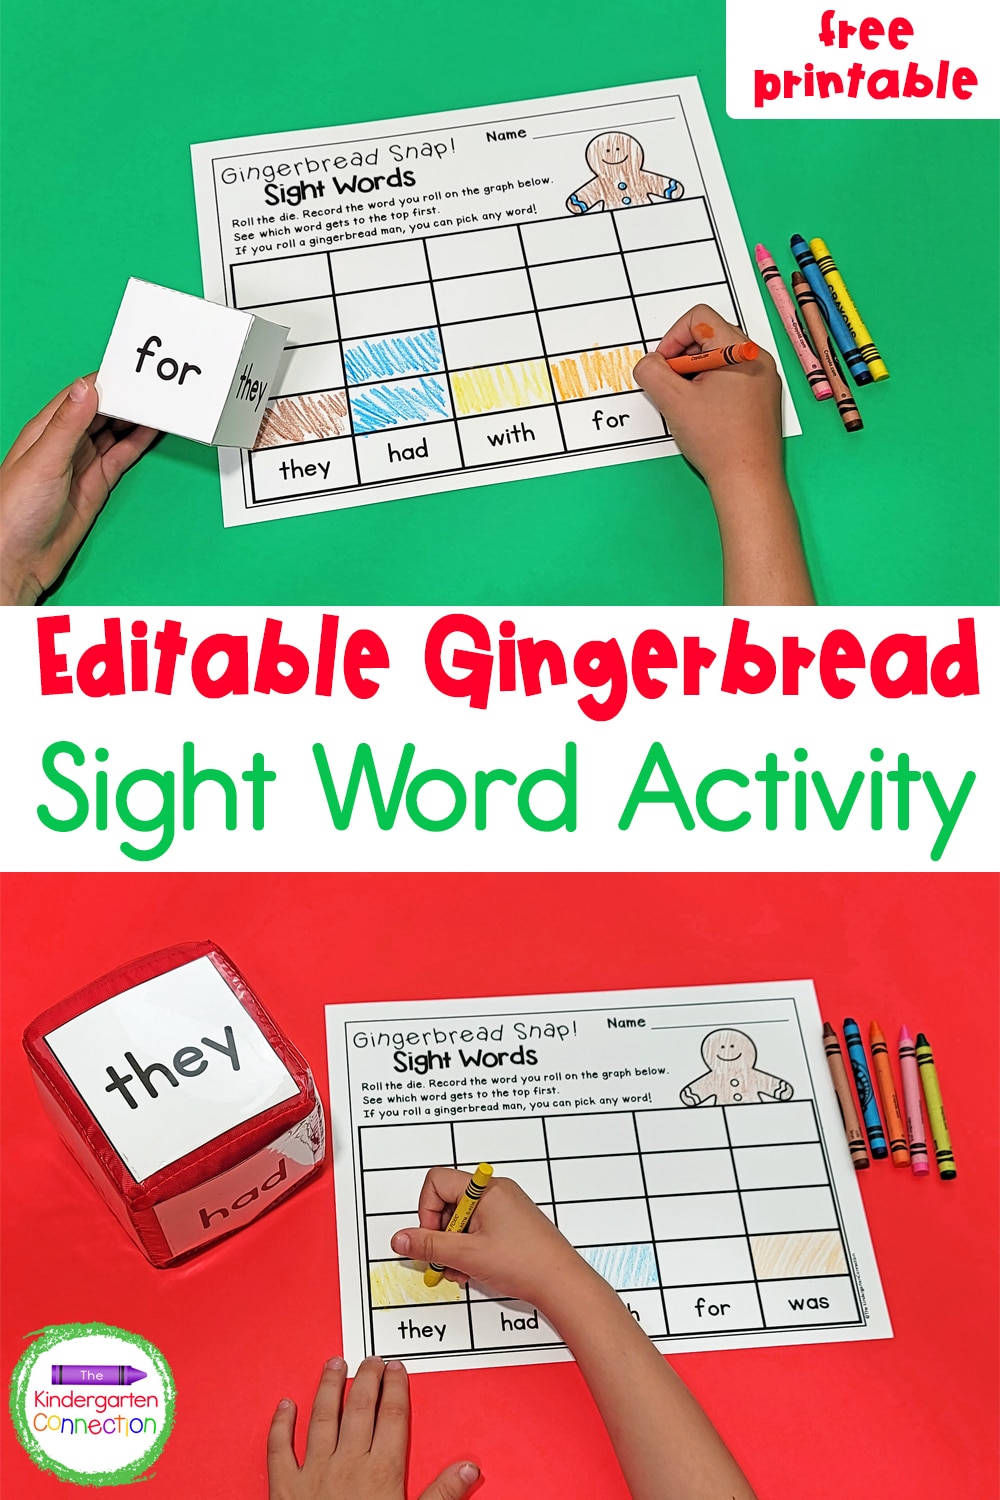 This free Gingerbread Sight Word Game is easy to prep, hands-on, and perfect for practicing sight words with your students!